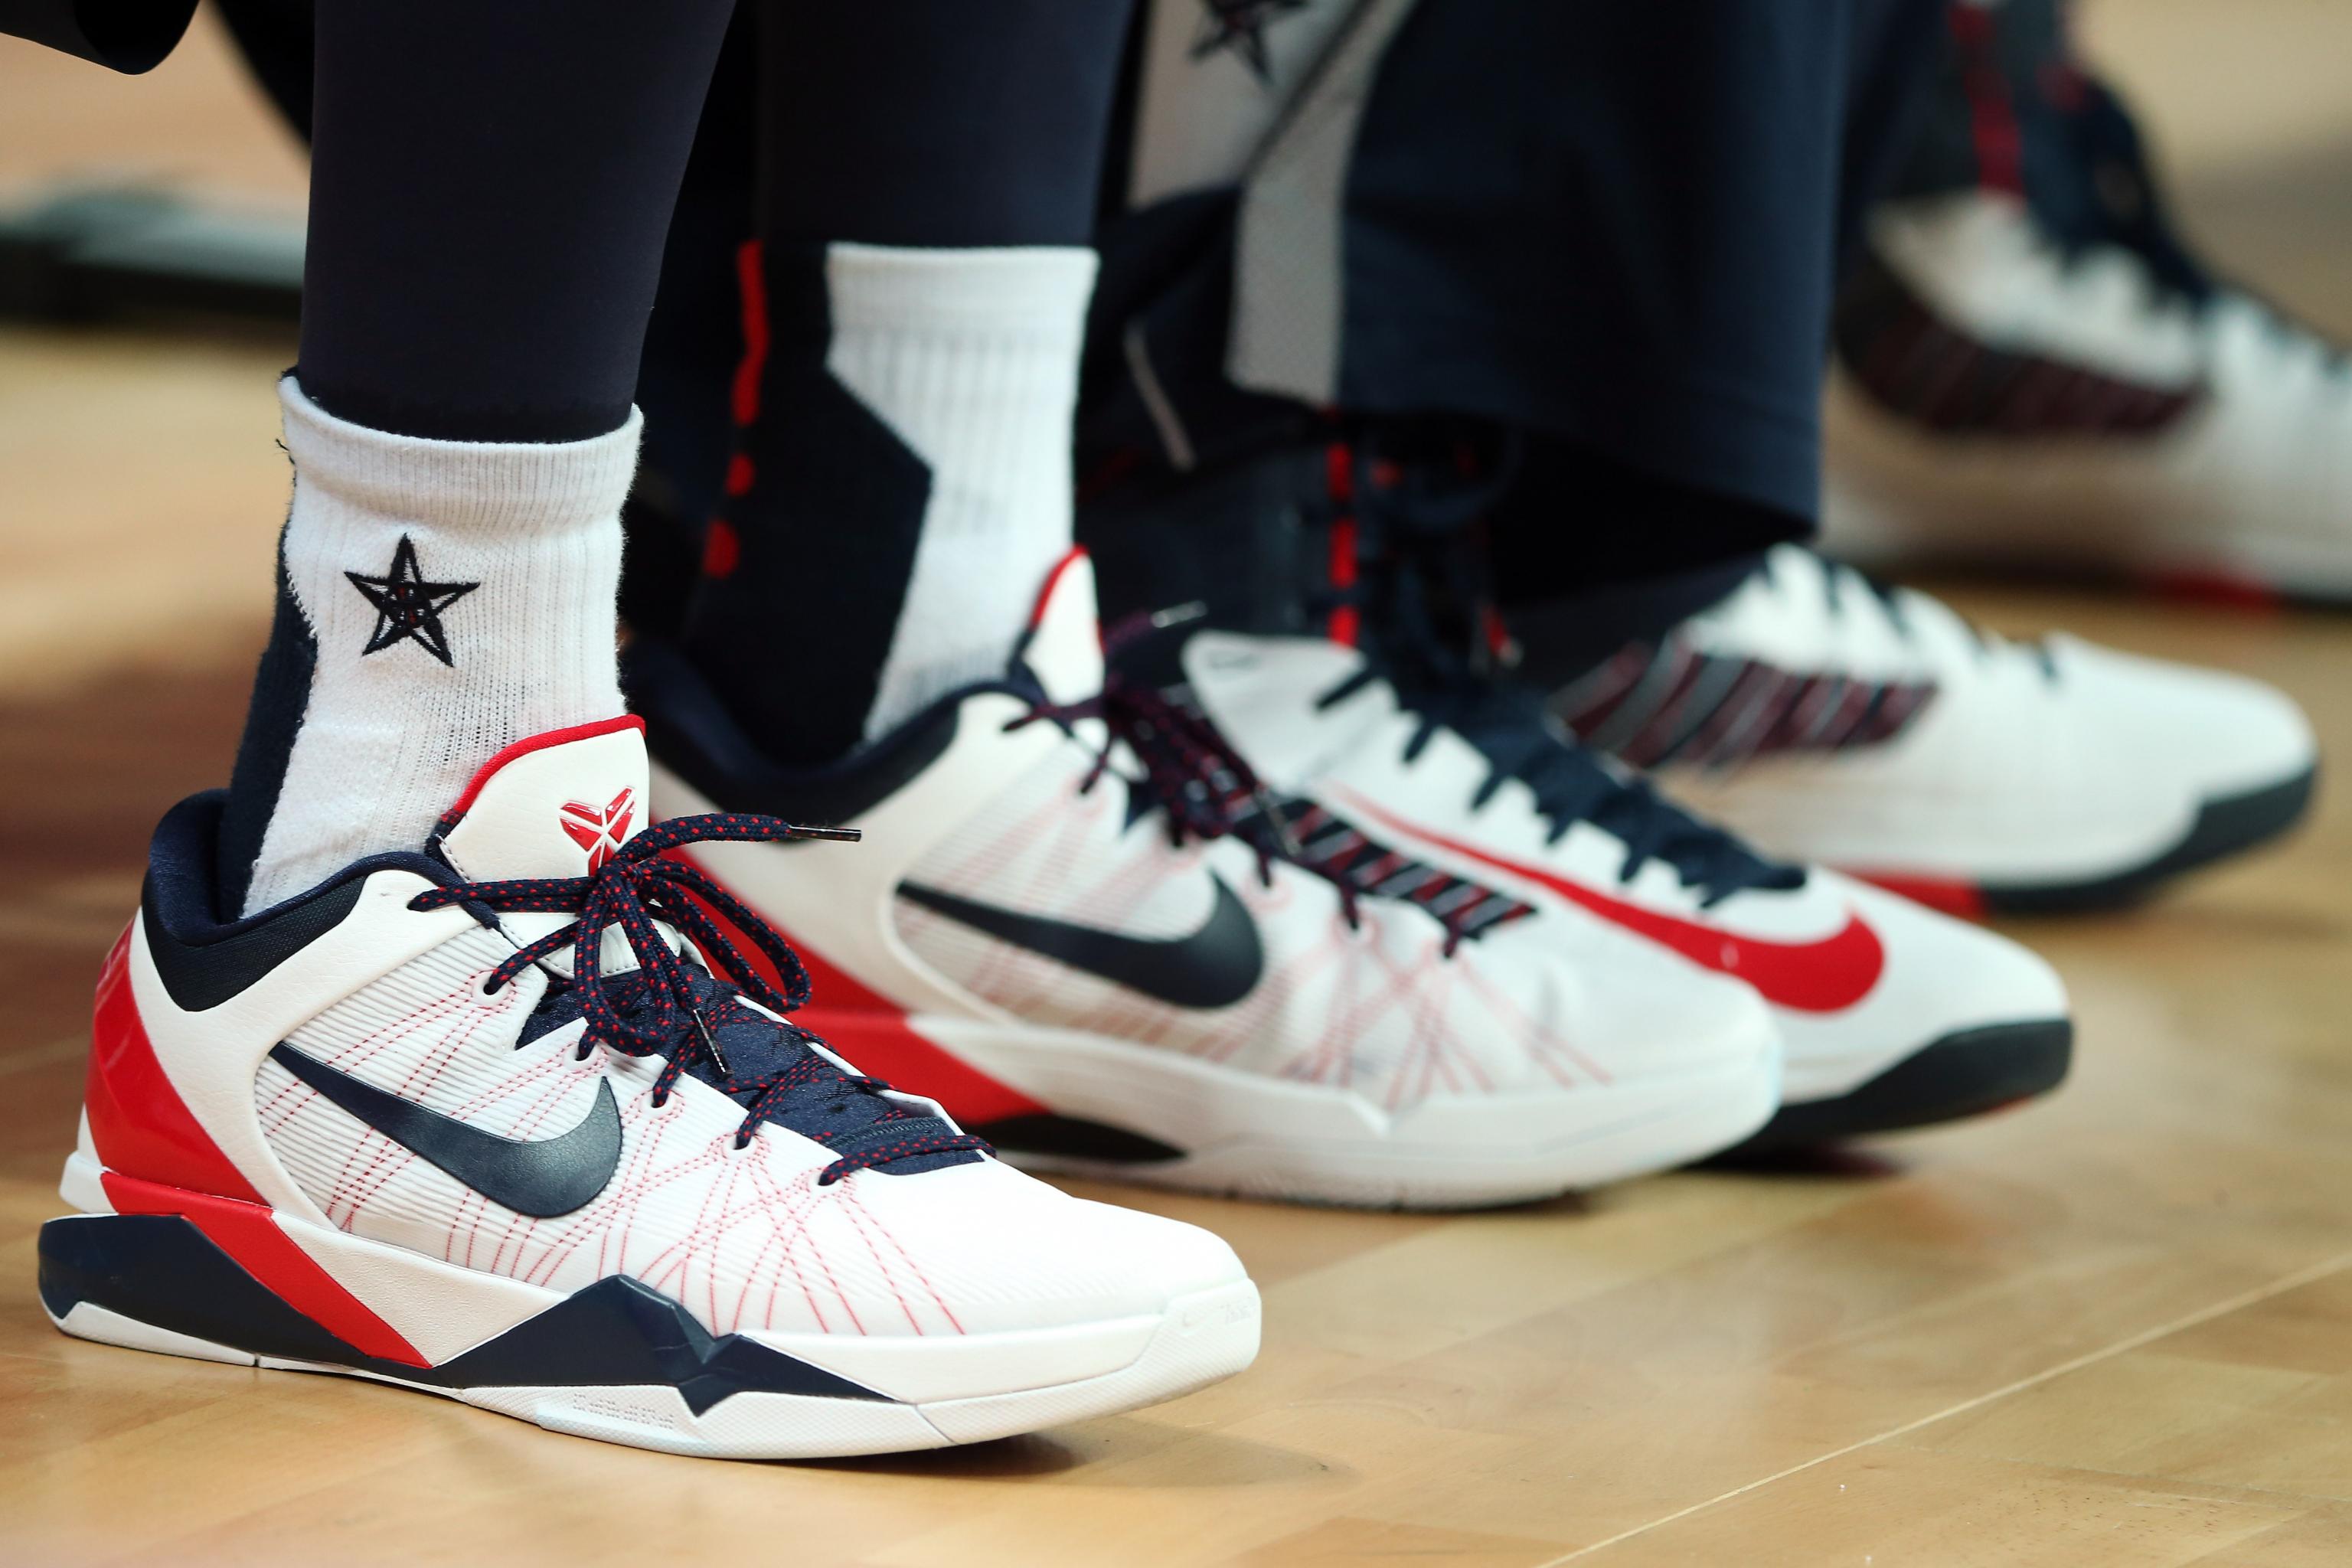 Highlighting Four New Shoes Worn in the NBA Last Night - Sports